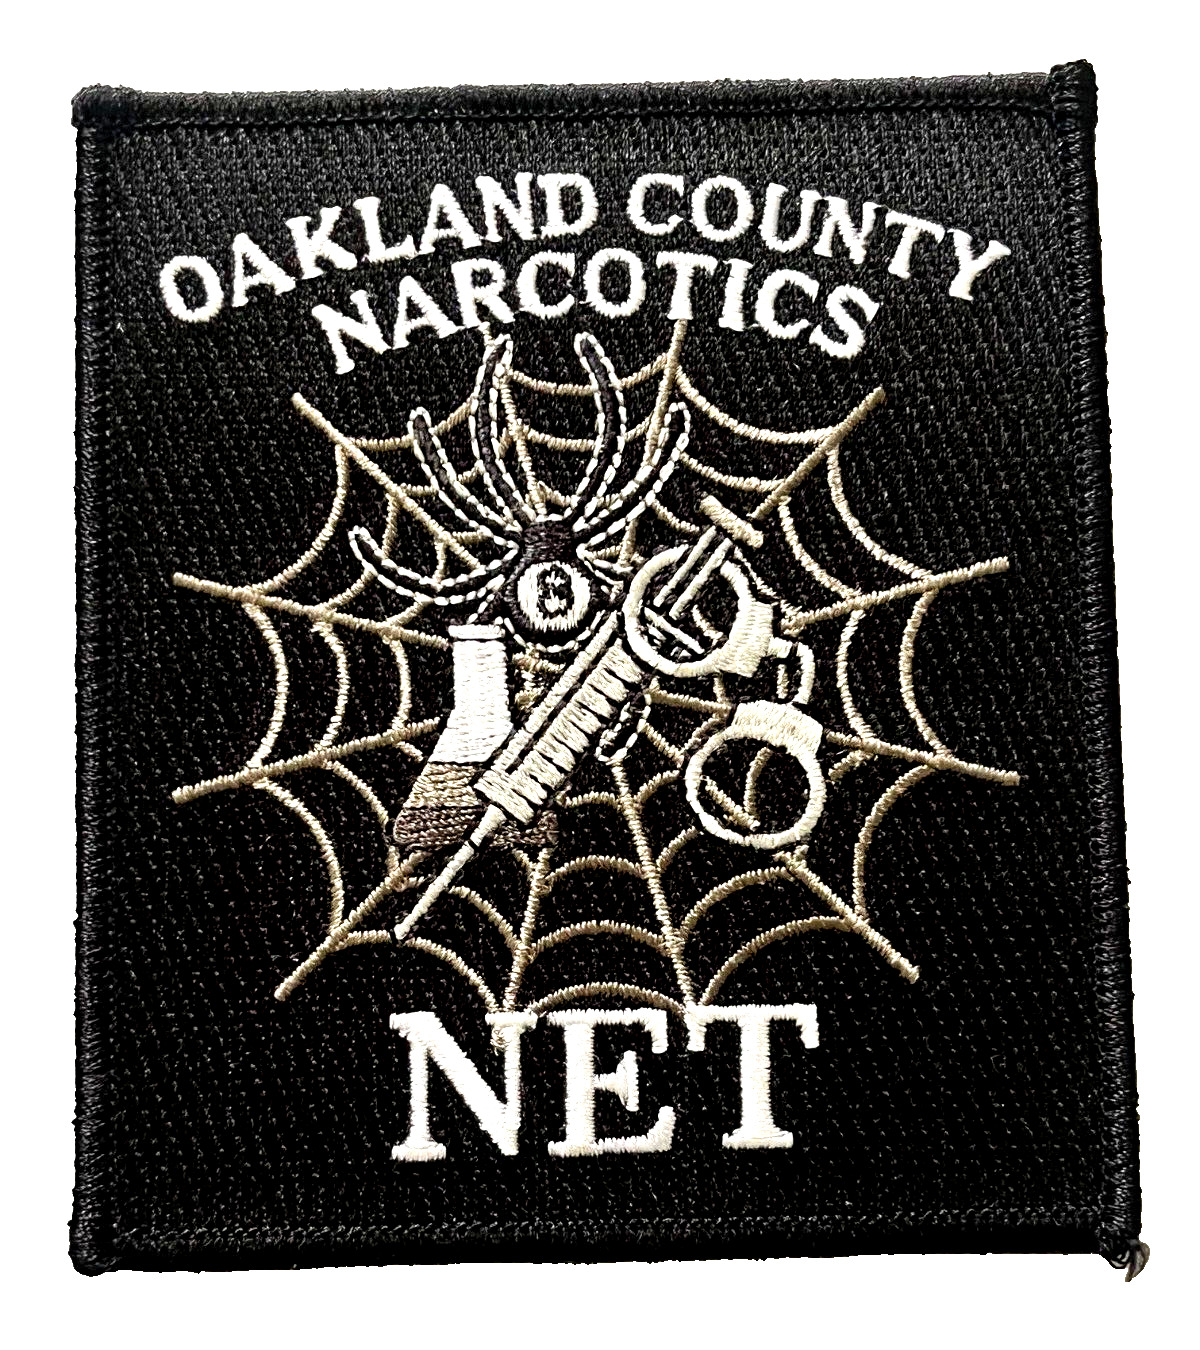 OAKLAND COUNTY NARCOTICS NET ENFORCEMENT TEAM PATCH MICHIGAN SHERIFF POLICE PD7